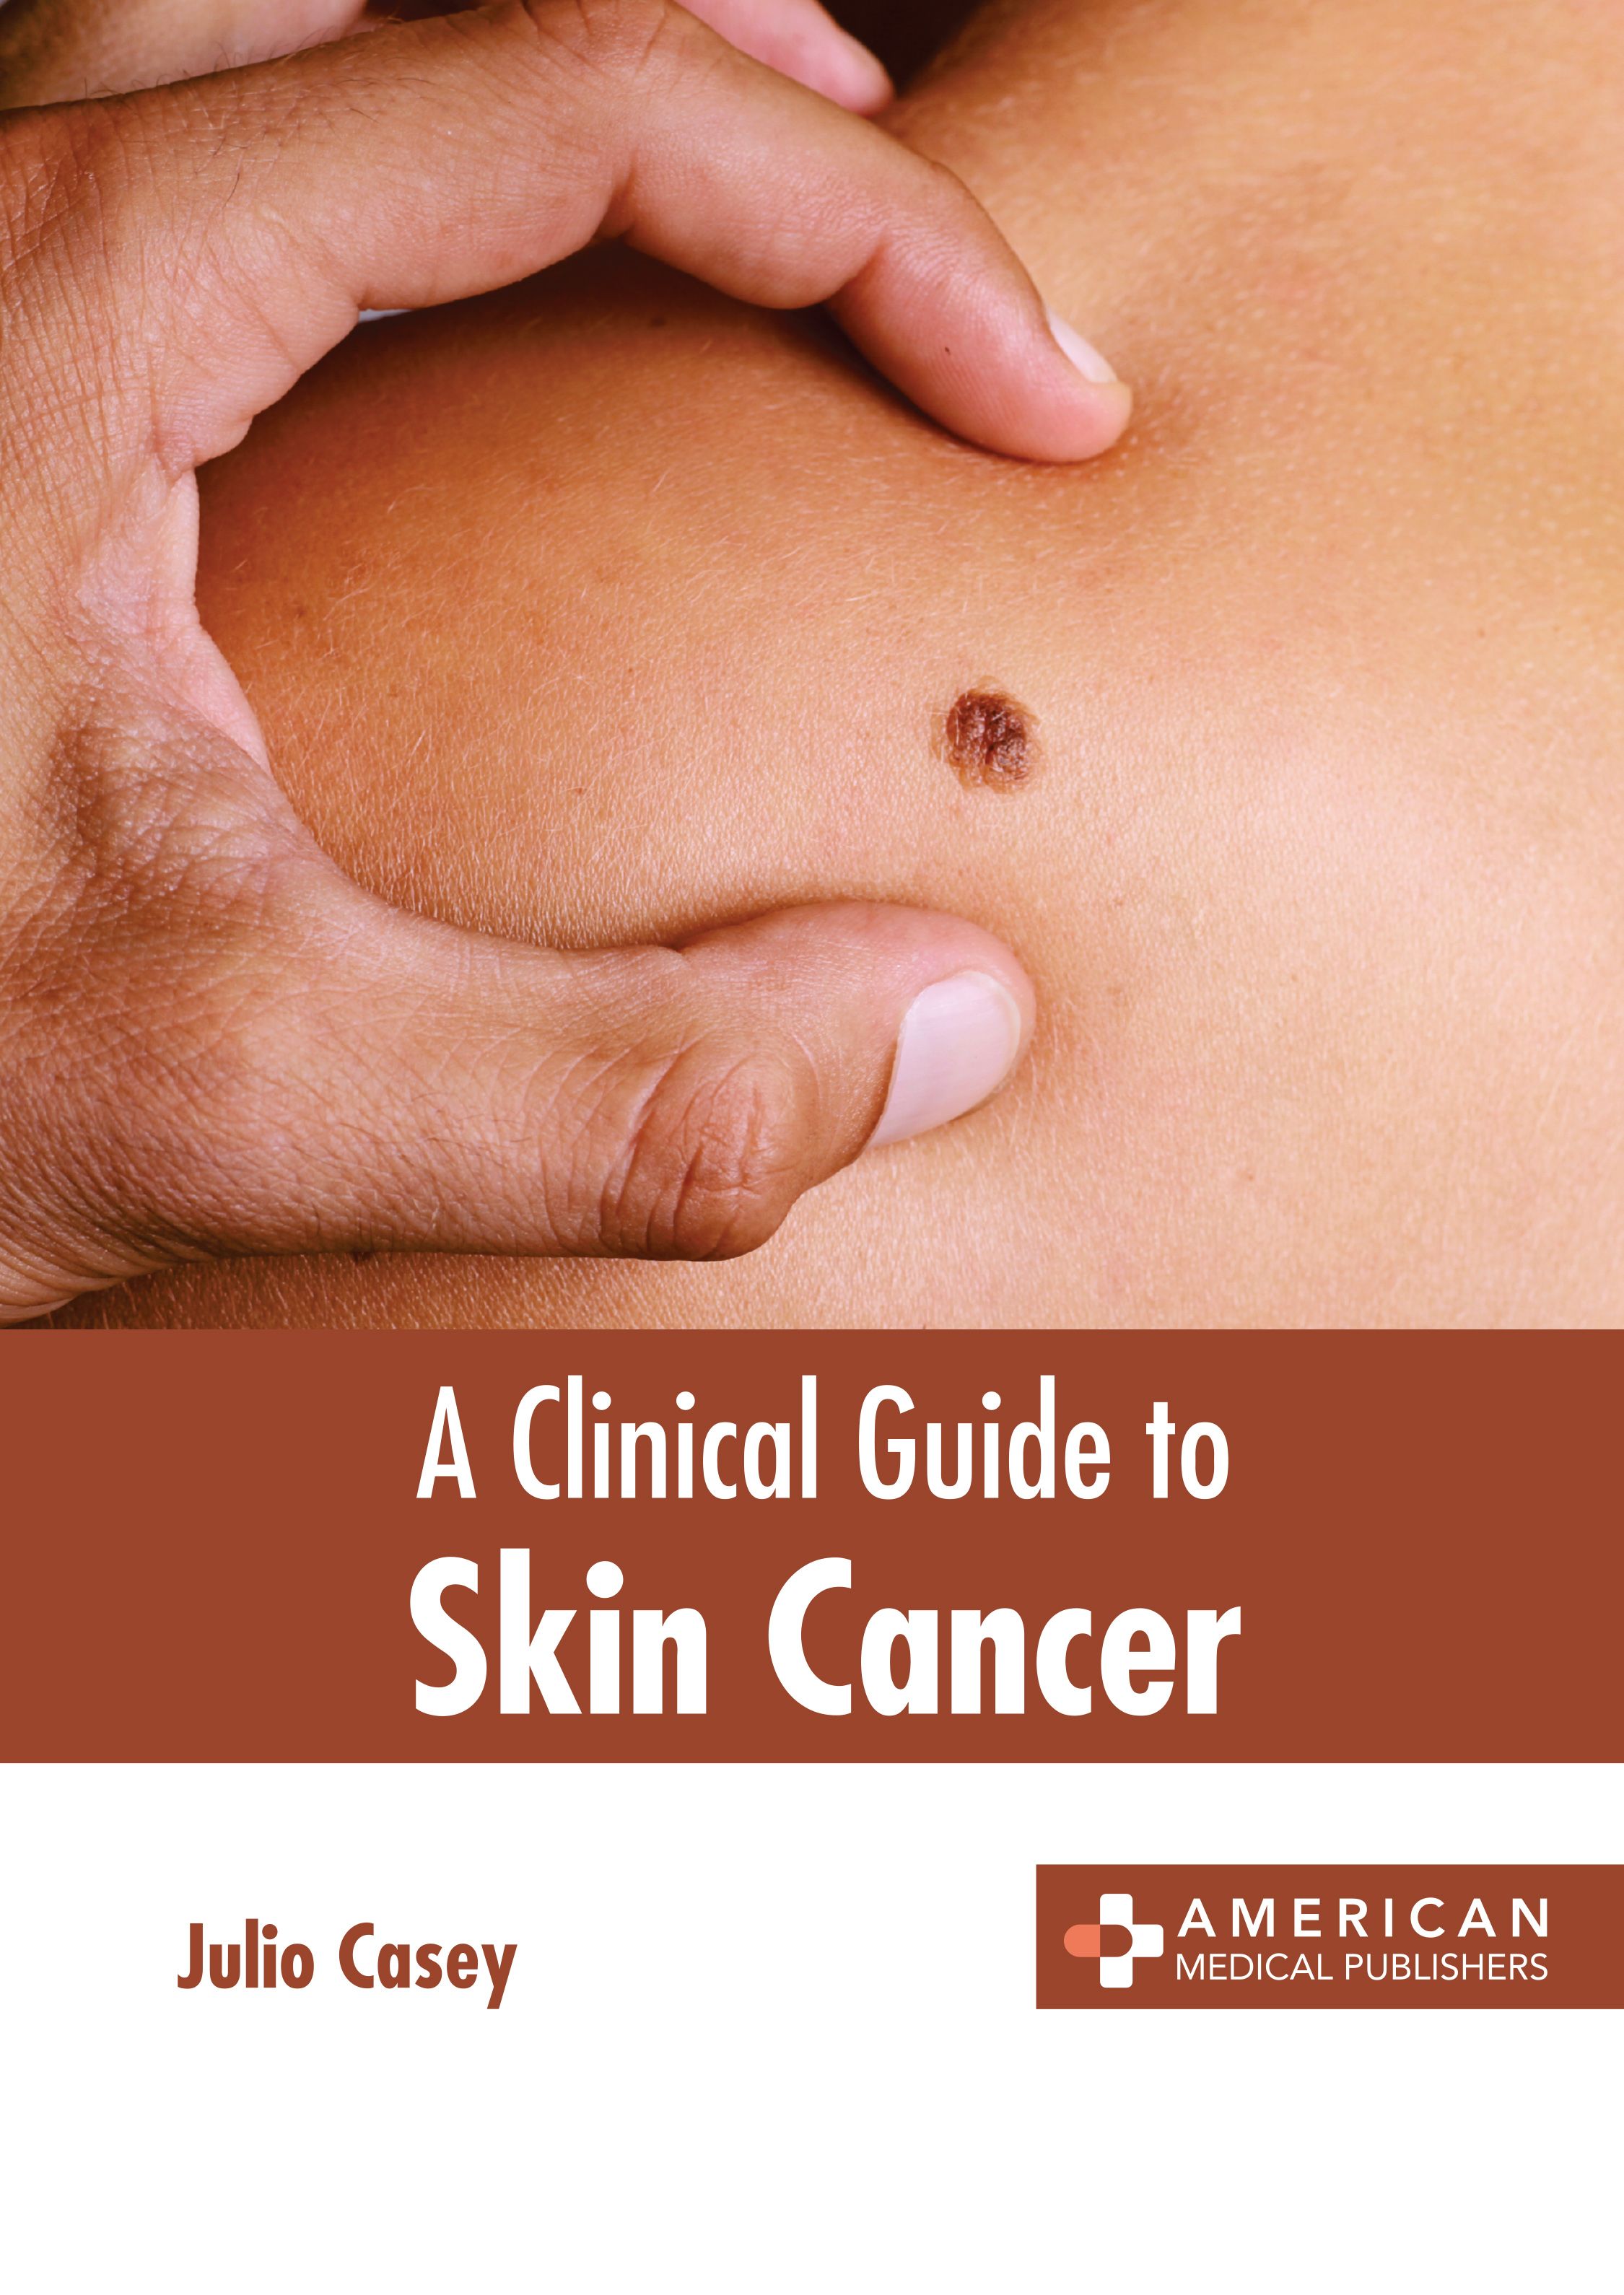 A CLINICAL GUIDE TO SKIN CANCER